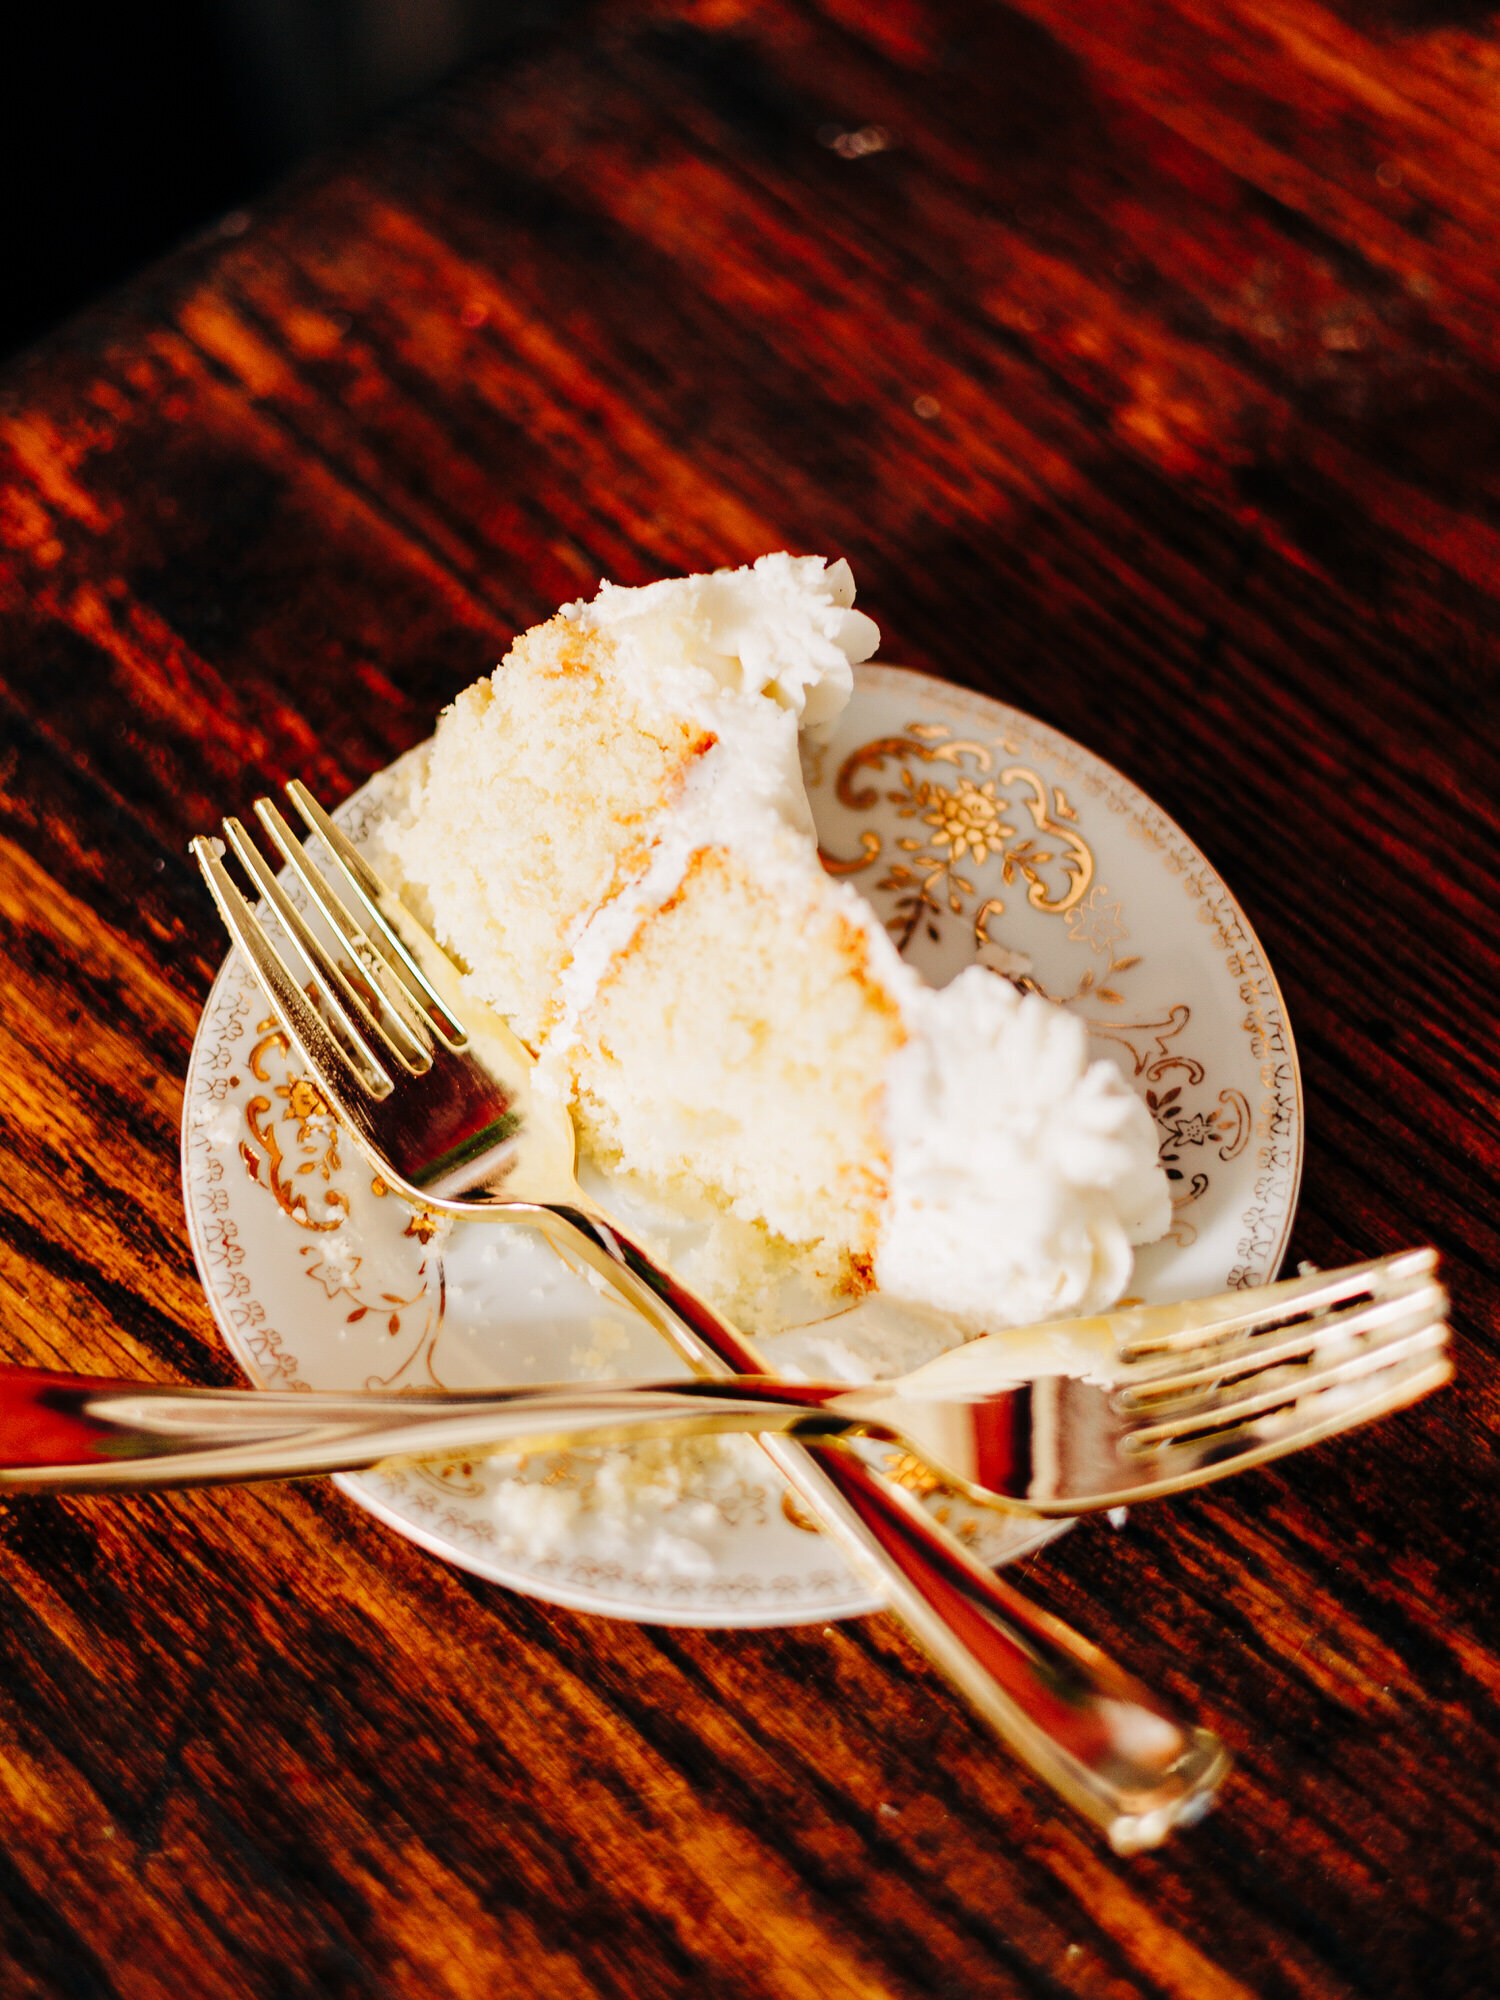 This image features a wedding cake on a vintage plate that has been cut by the bride and groom. Two gold forks are sitting on the plate, crossing over each other. The cake is white with white frosting.